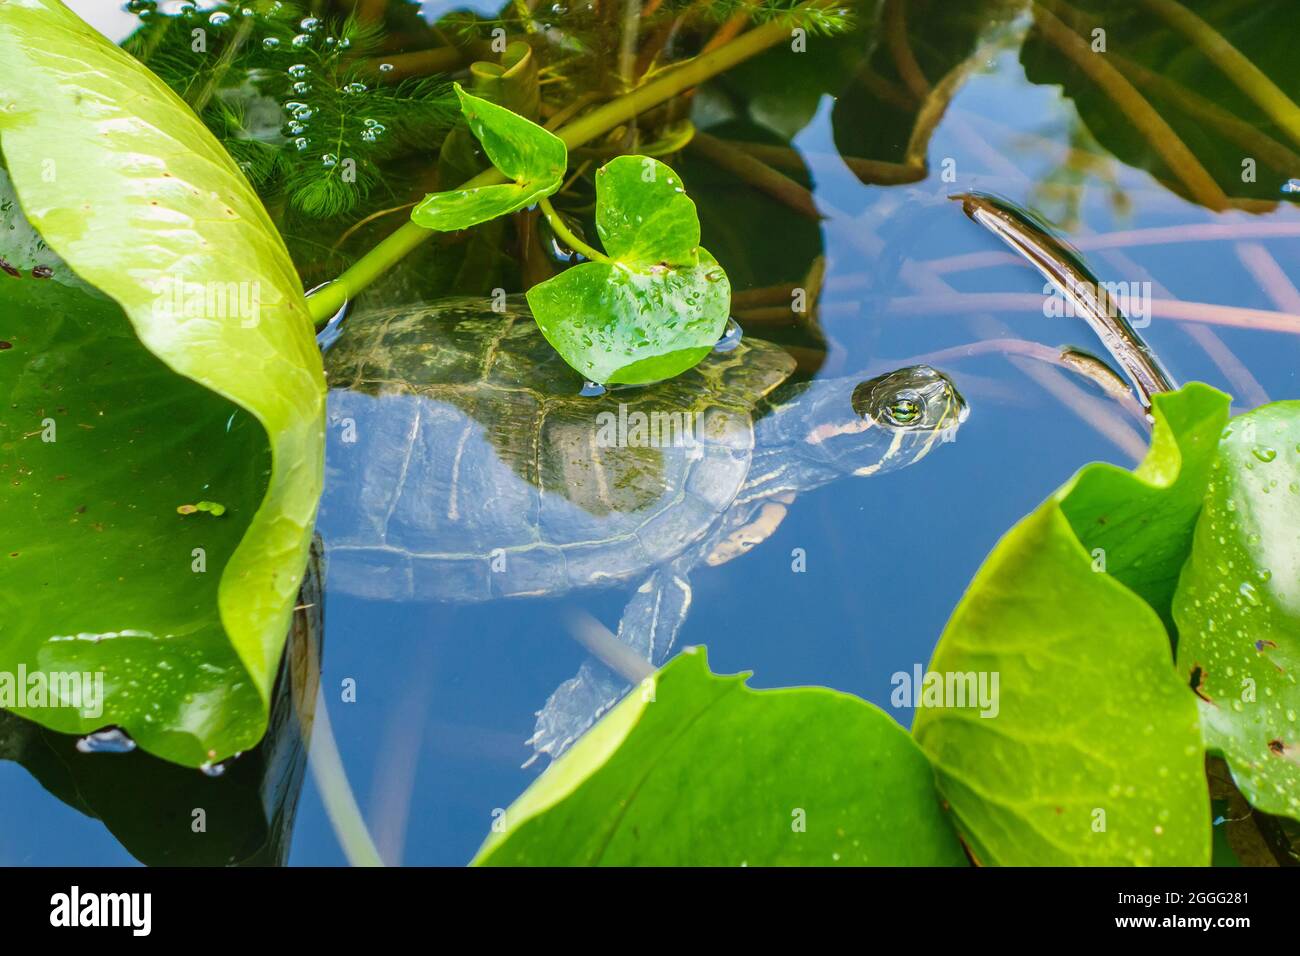 The turtle sticks its head out of the water for a breath of air. The water surface is covered with water lily leaves Stock Photo